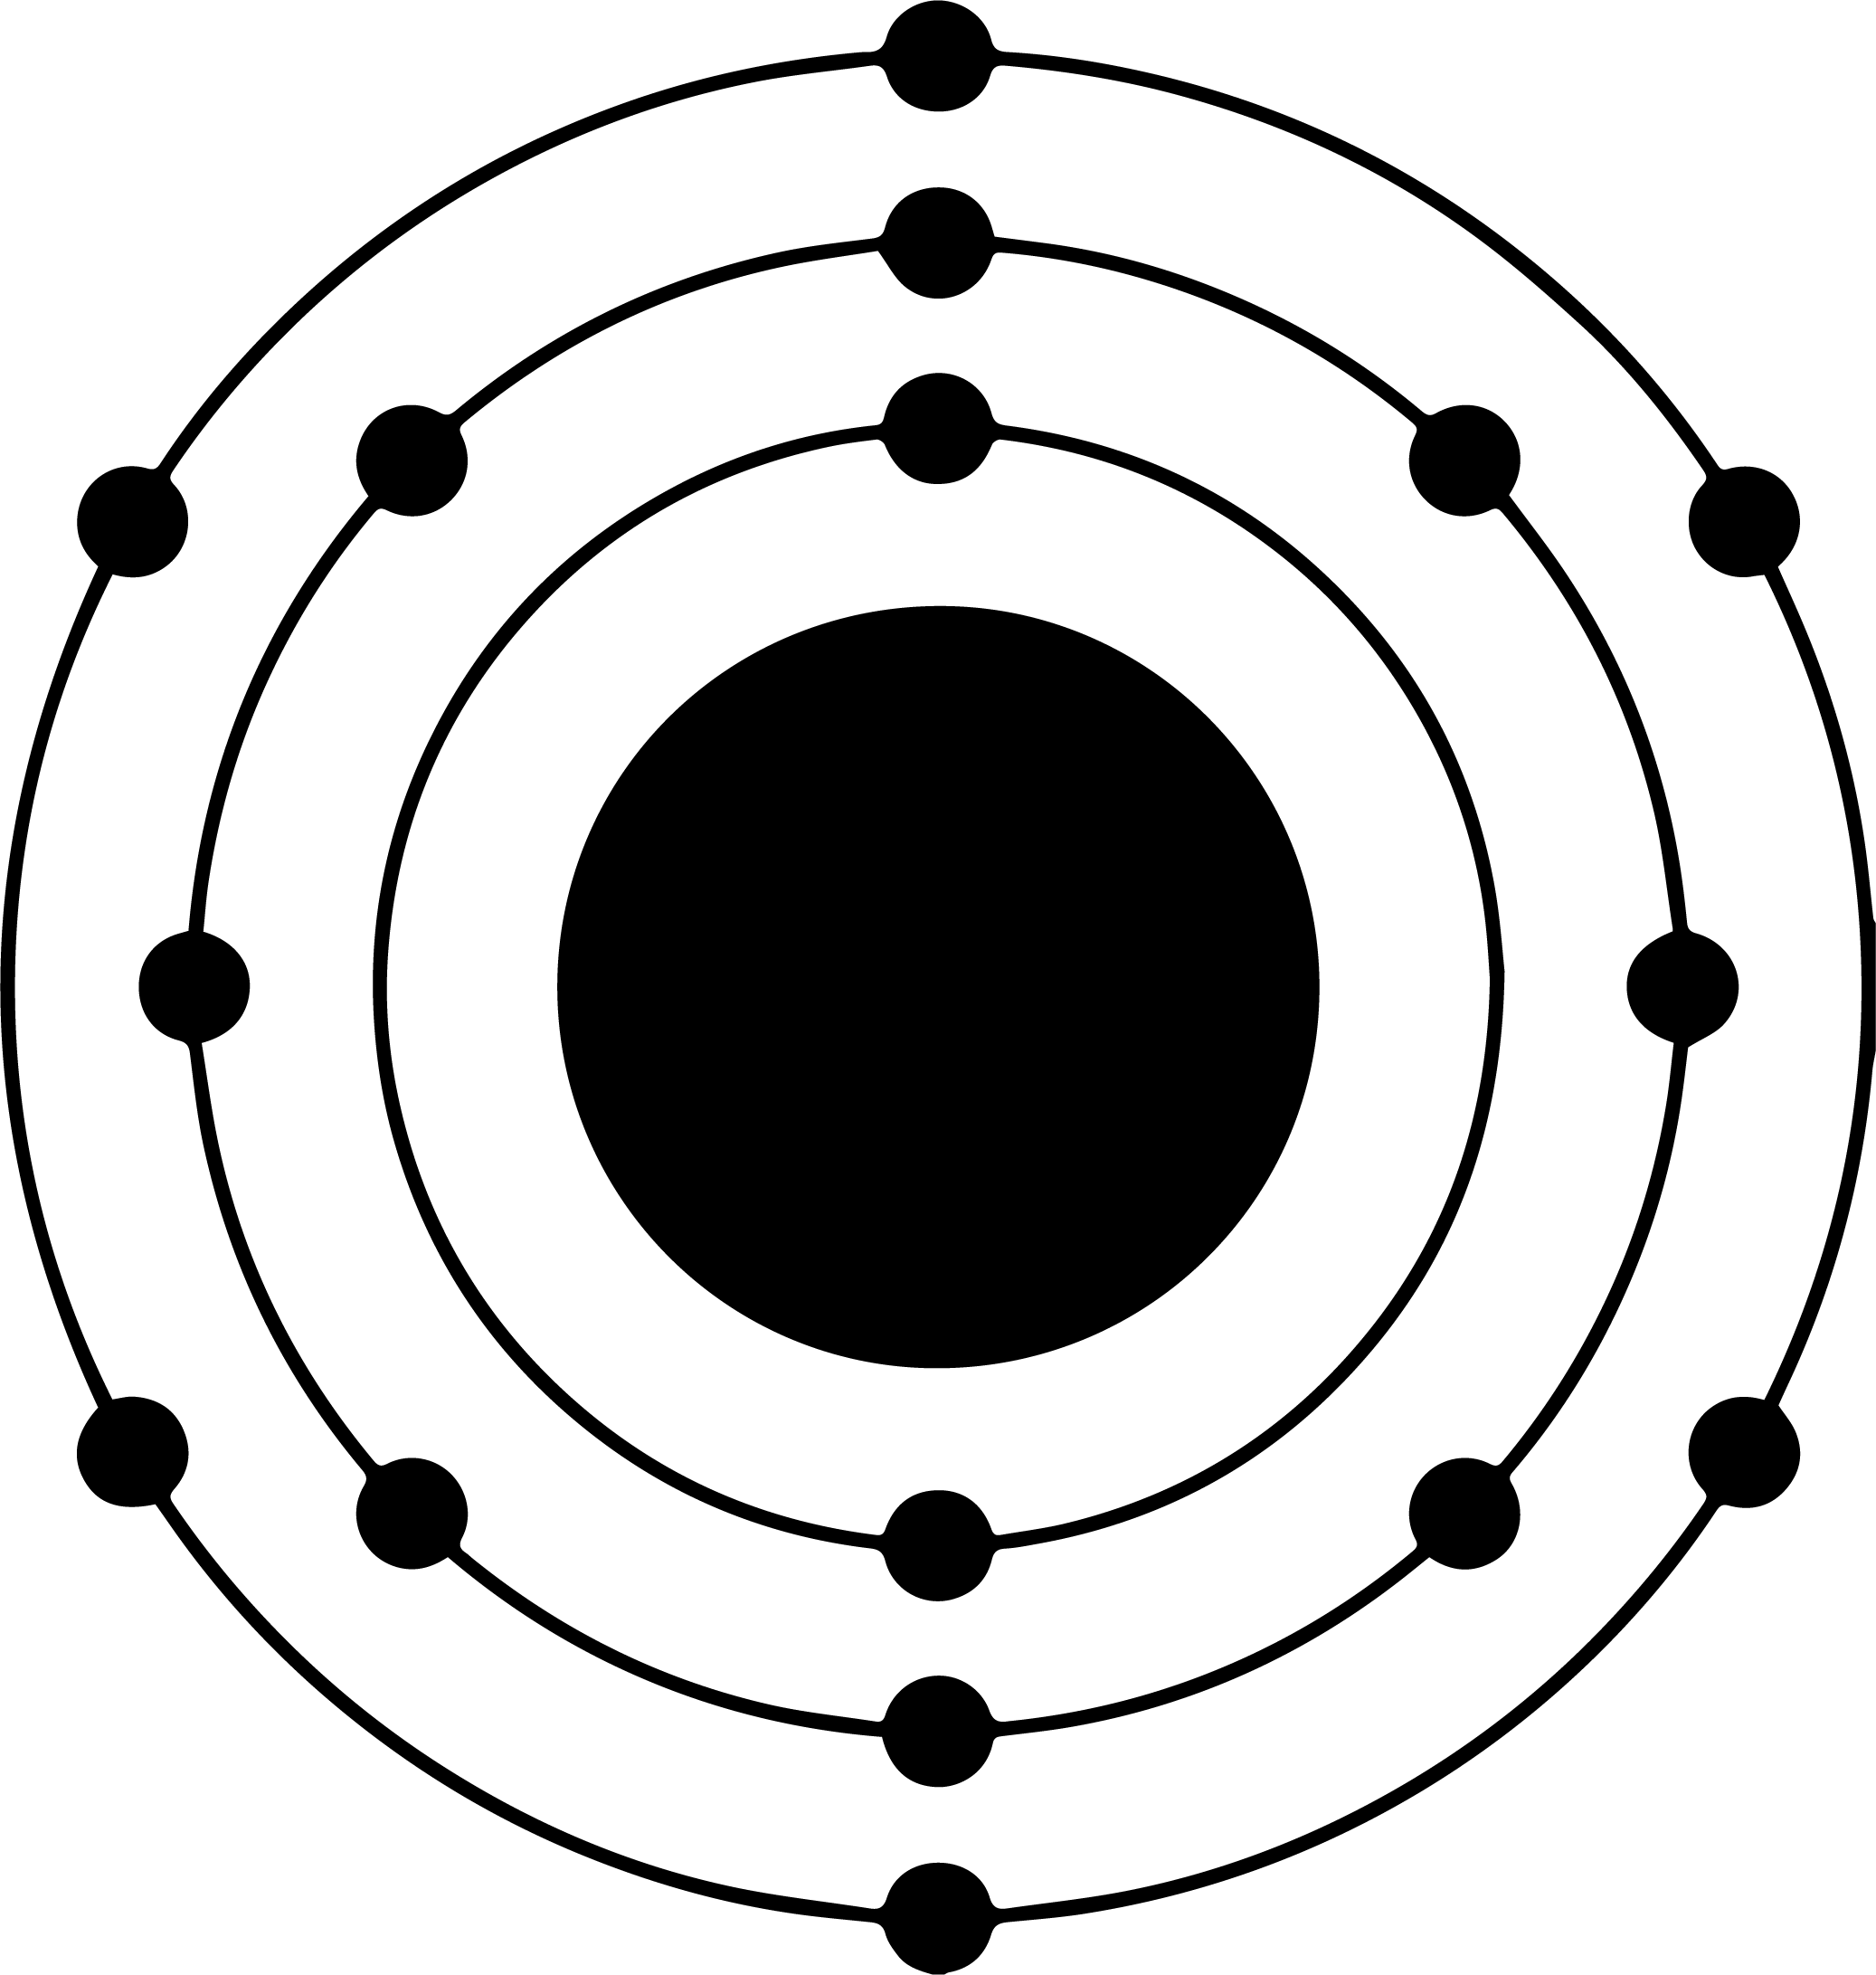 A drawing of a sulfur atom represented as a large black circle on a white background surrounded by 3 thin black rings with 2 small black circles aligned vertically on the inner ring, 8 small black circles on the second ring and 6 small black circles on the outer ring. The small circles are evenly spaced on their rings.